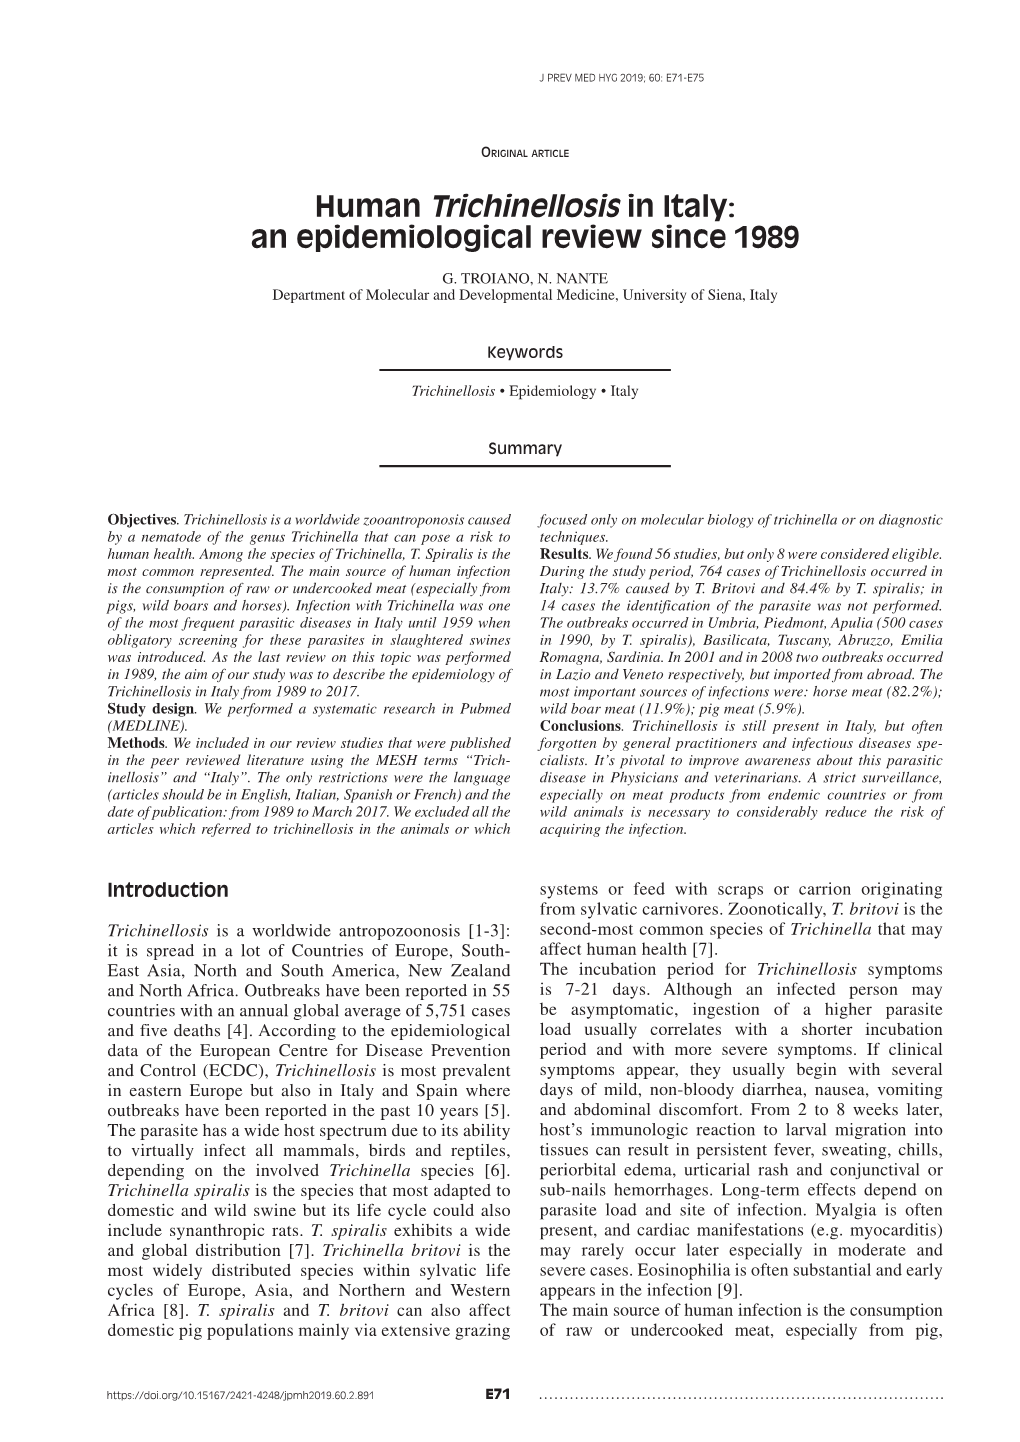 Human Trichinellosis in Italy: an Epidemiological Review Since 1989